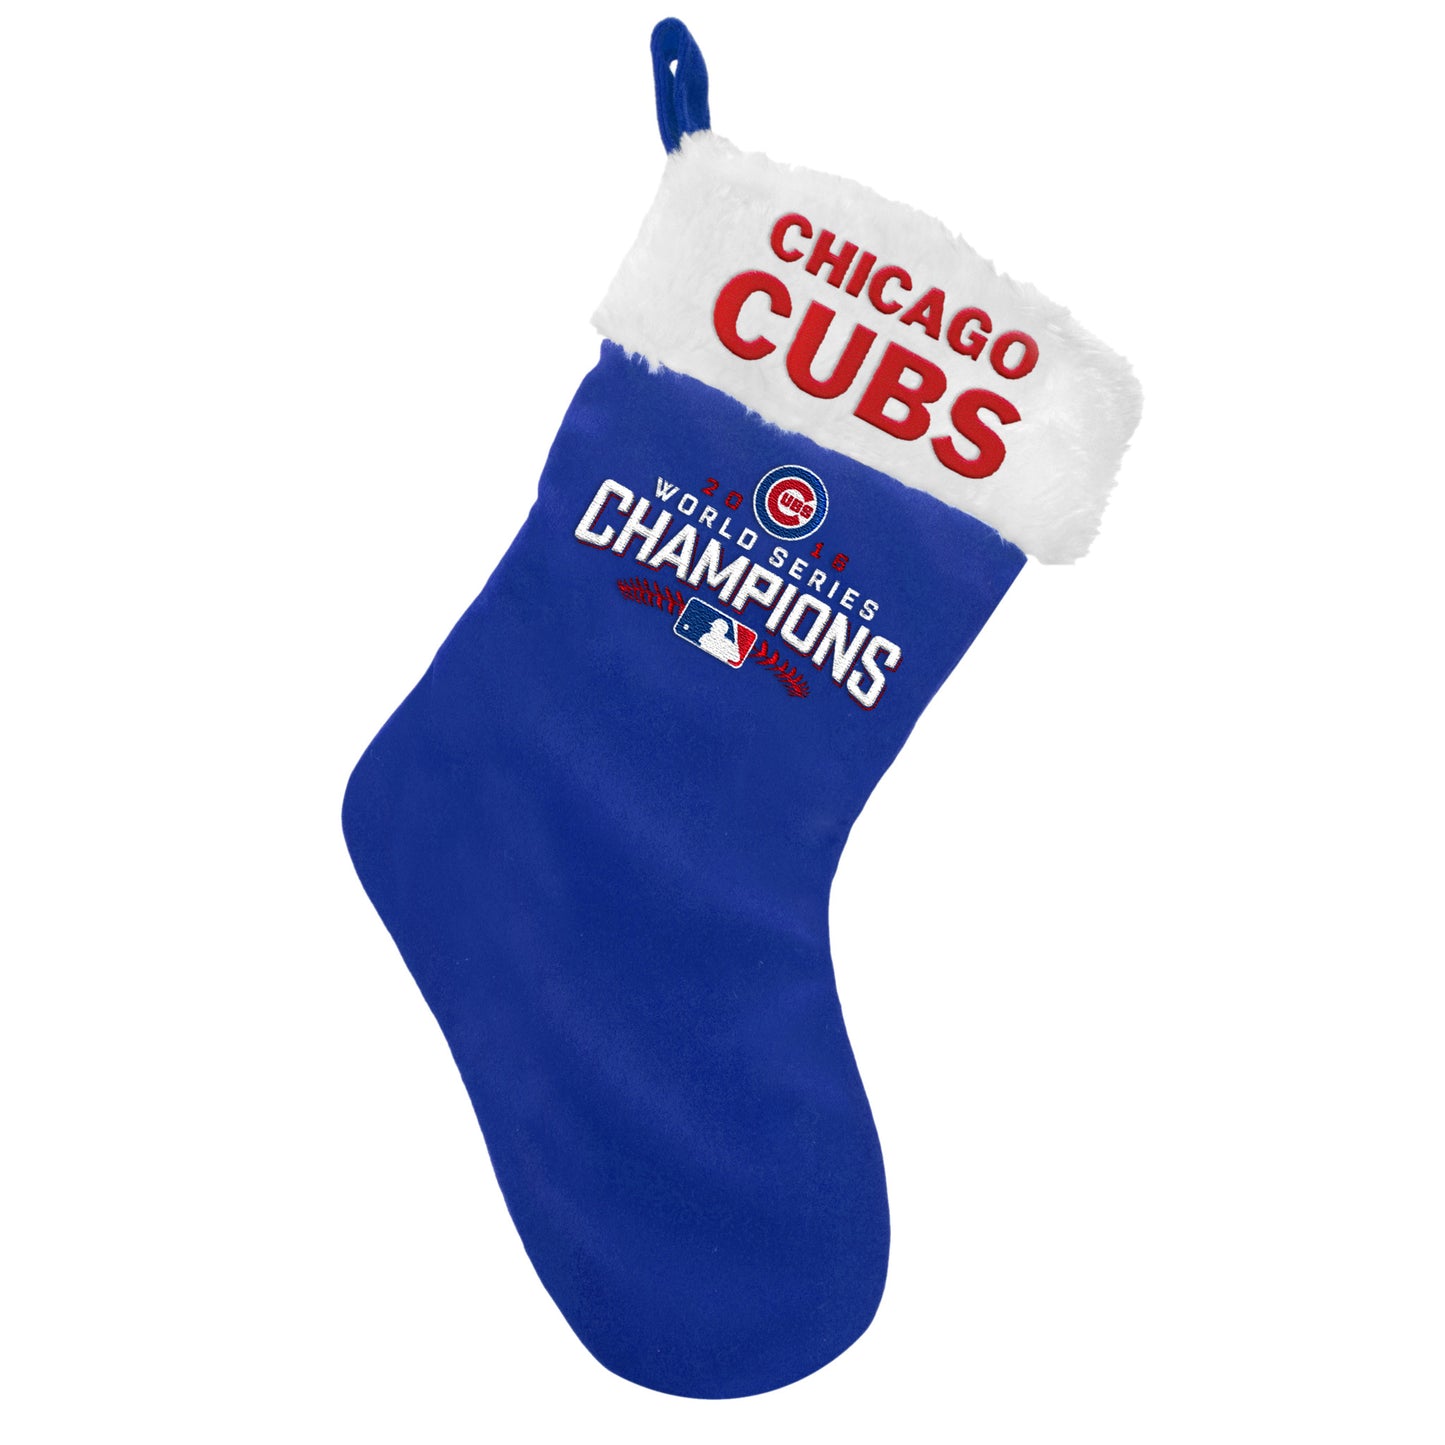 Chicago Cubs 2016 World Series Champions Stocking-Royal - Pro Jersey Sports